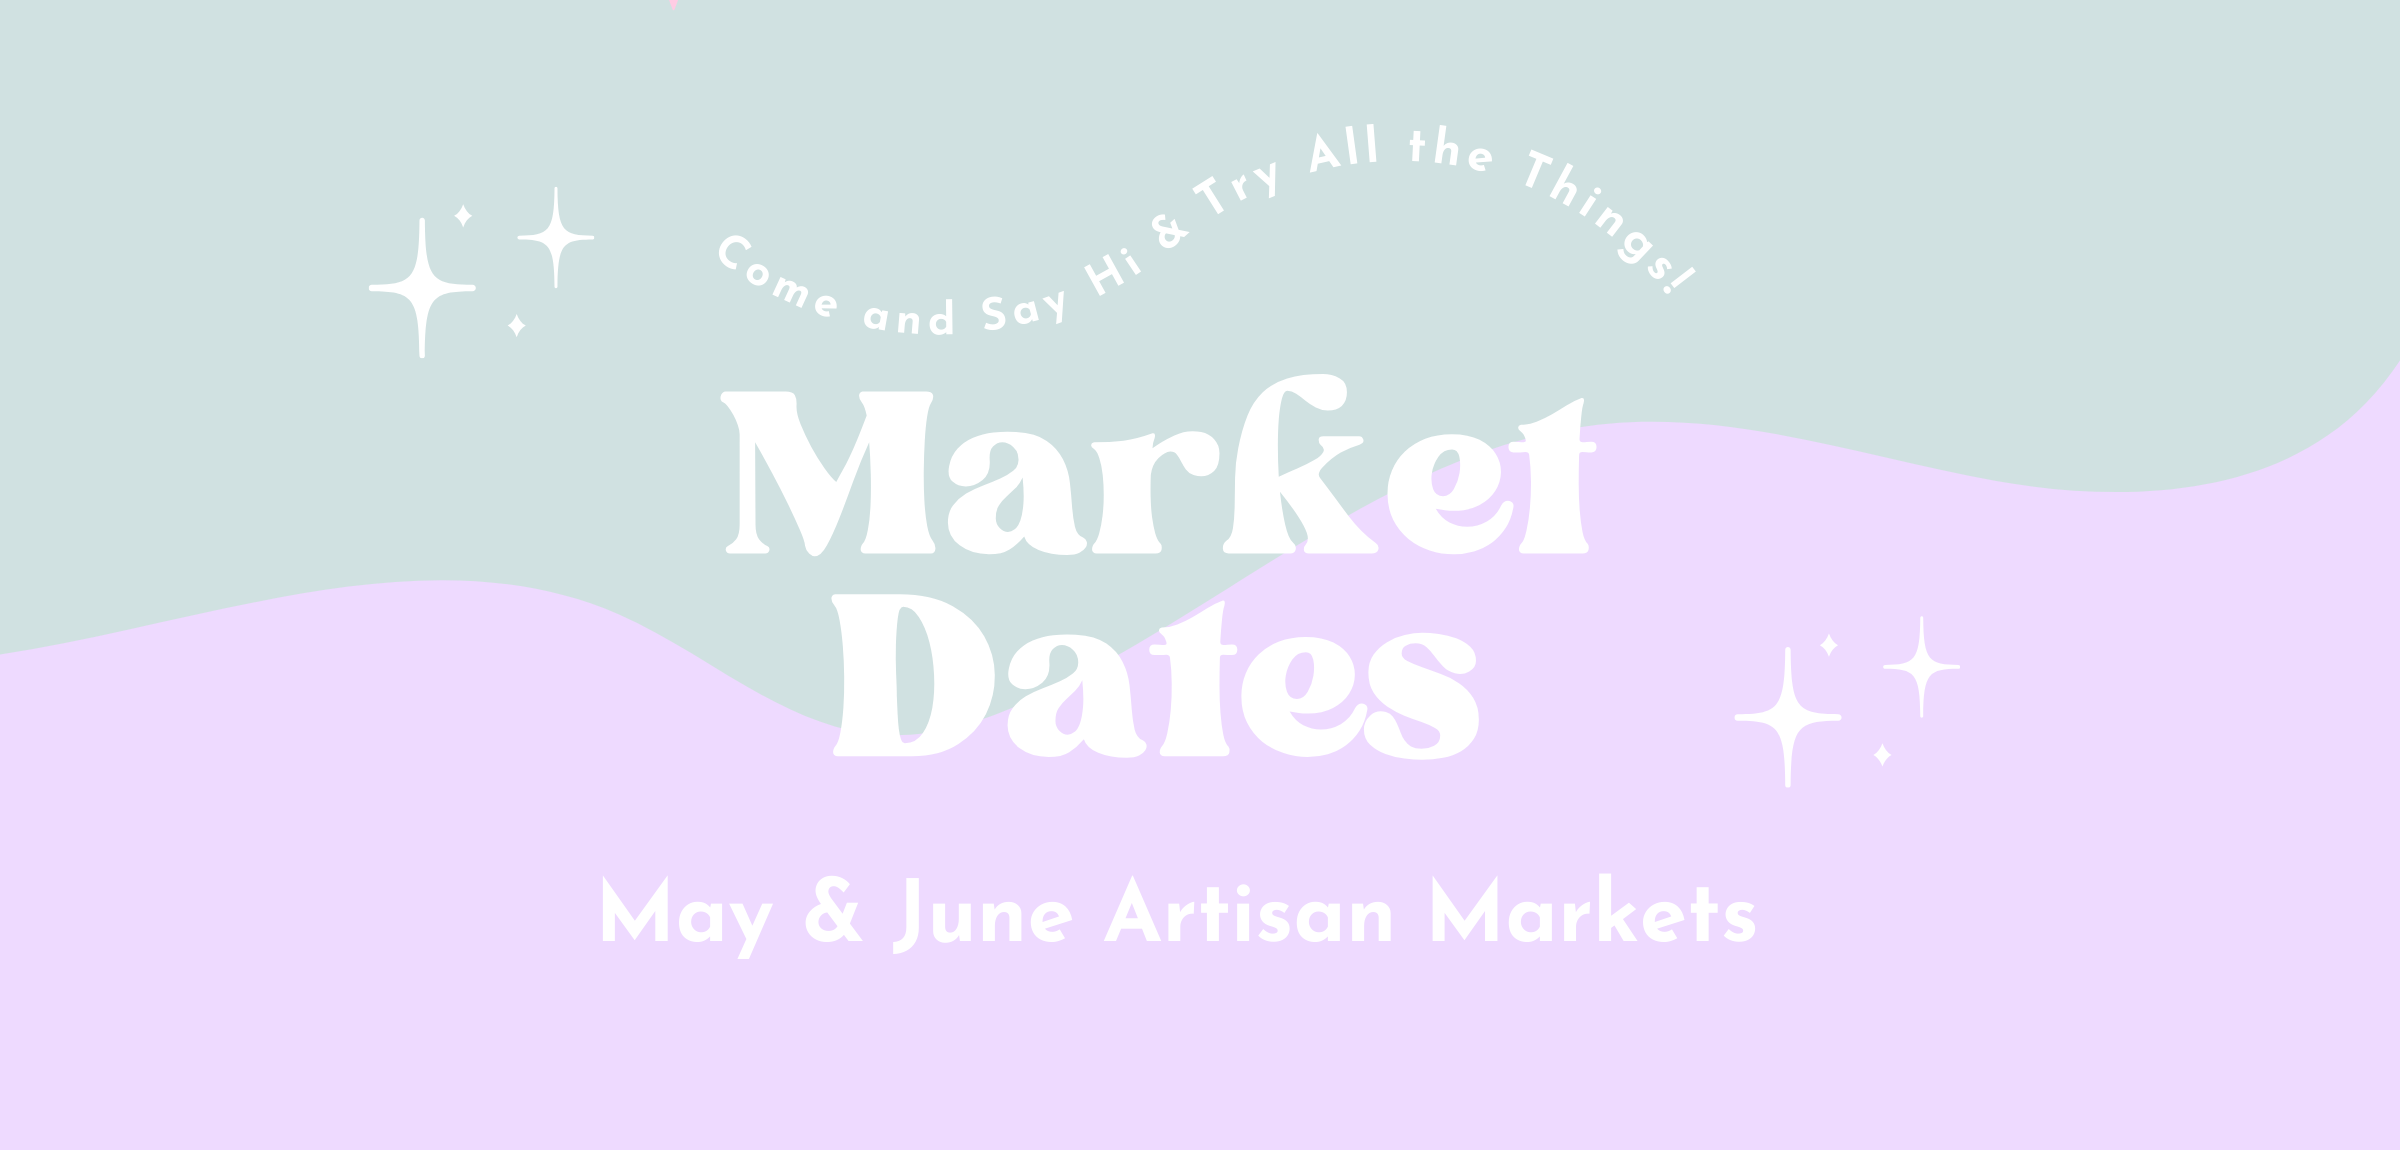 A pastel coloured poster highlighting the Market Dates for May and June